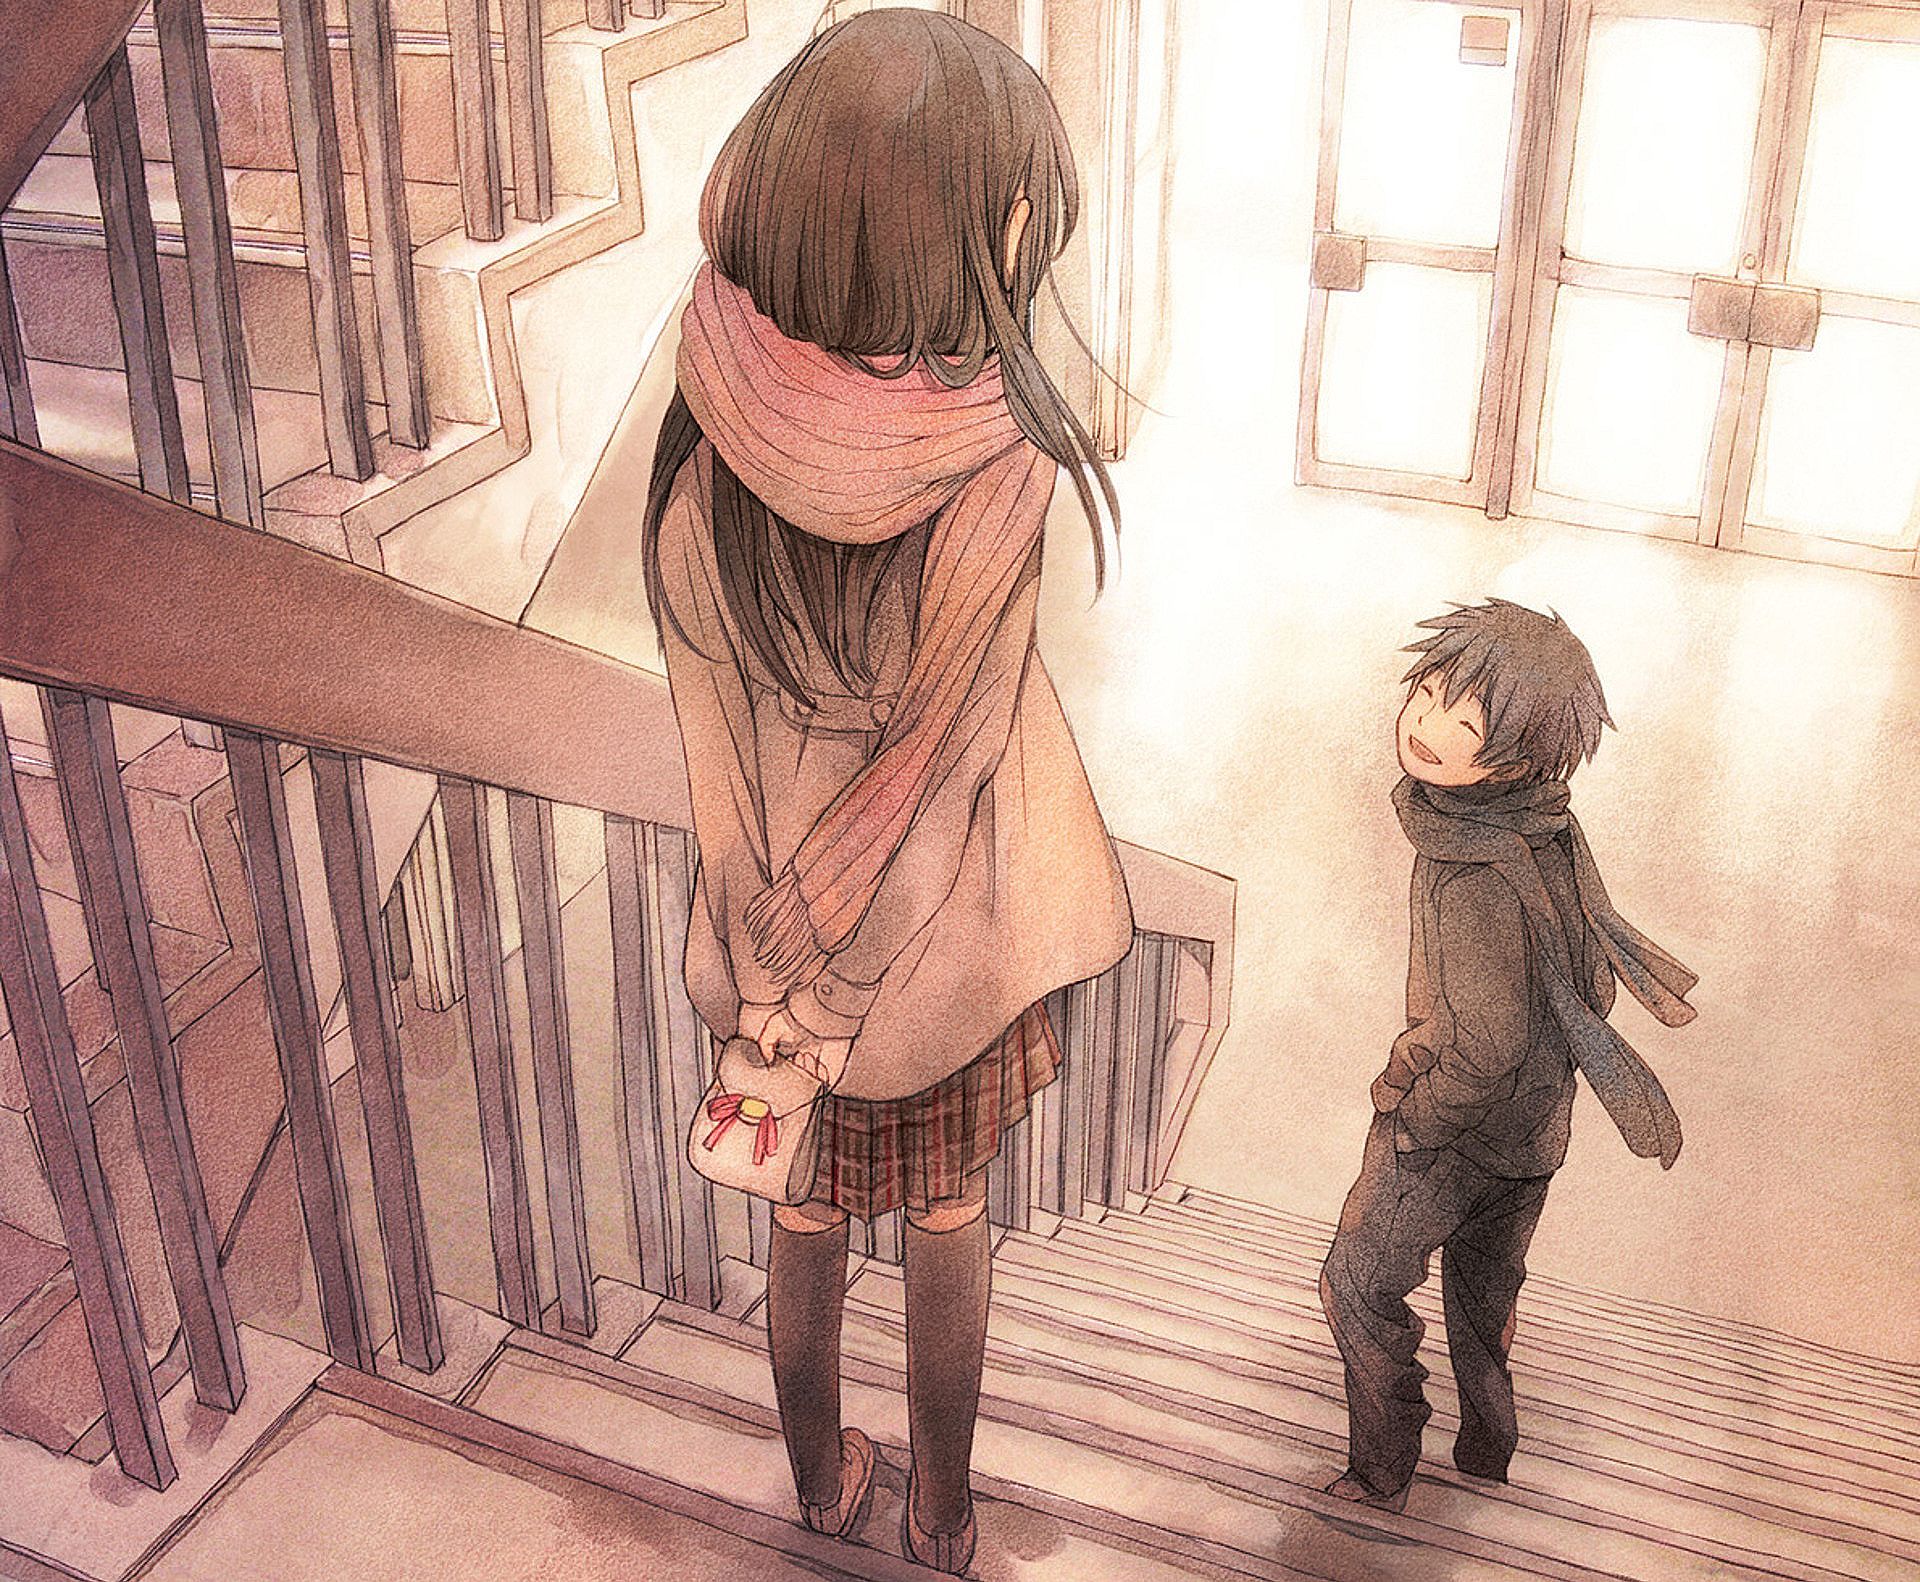 Anime - Boy And Girl, Different Background Wallpaper Download